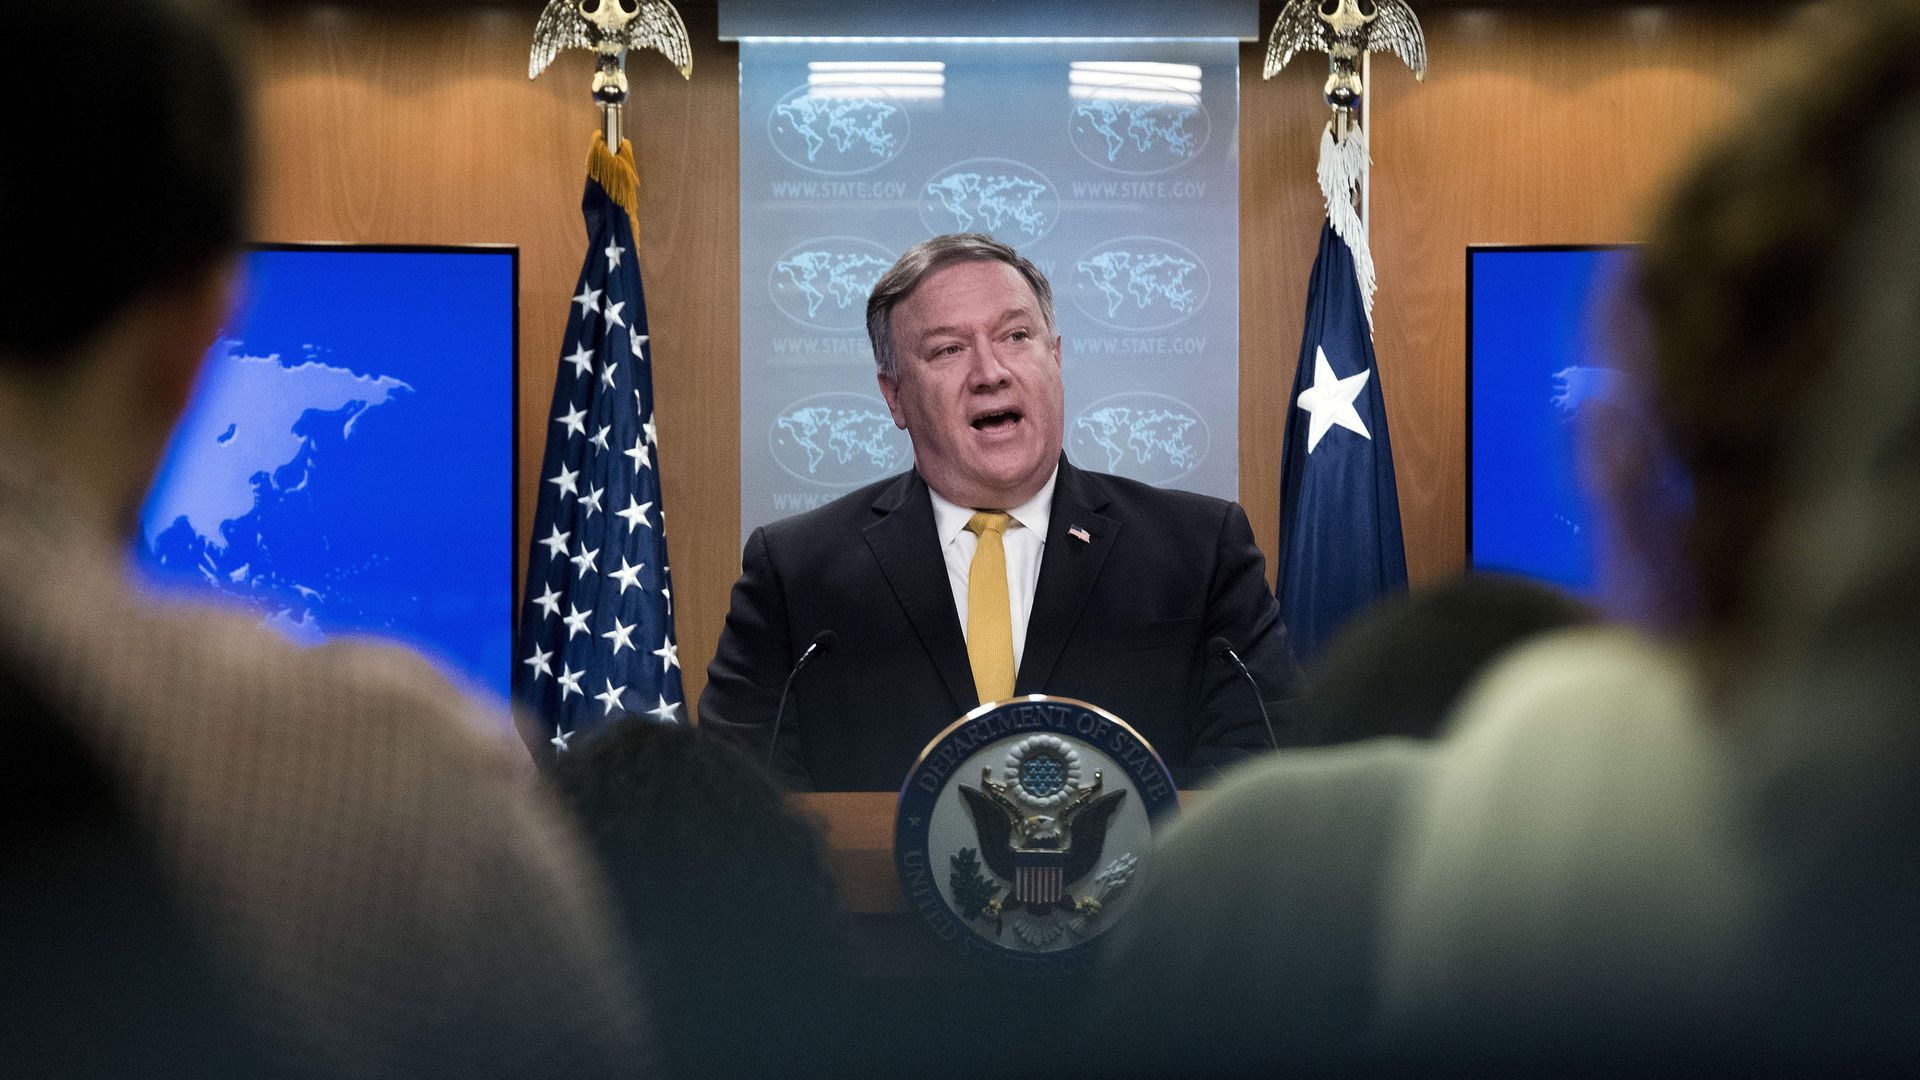 Mike Pompeo speaking at a podium